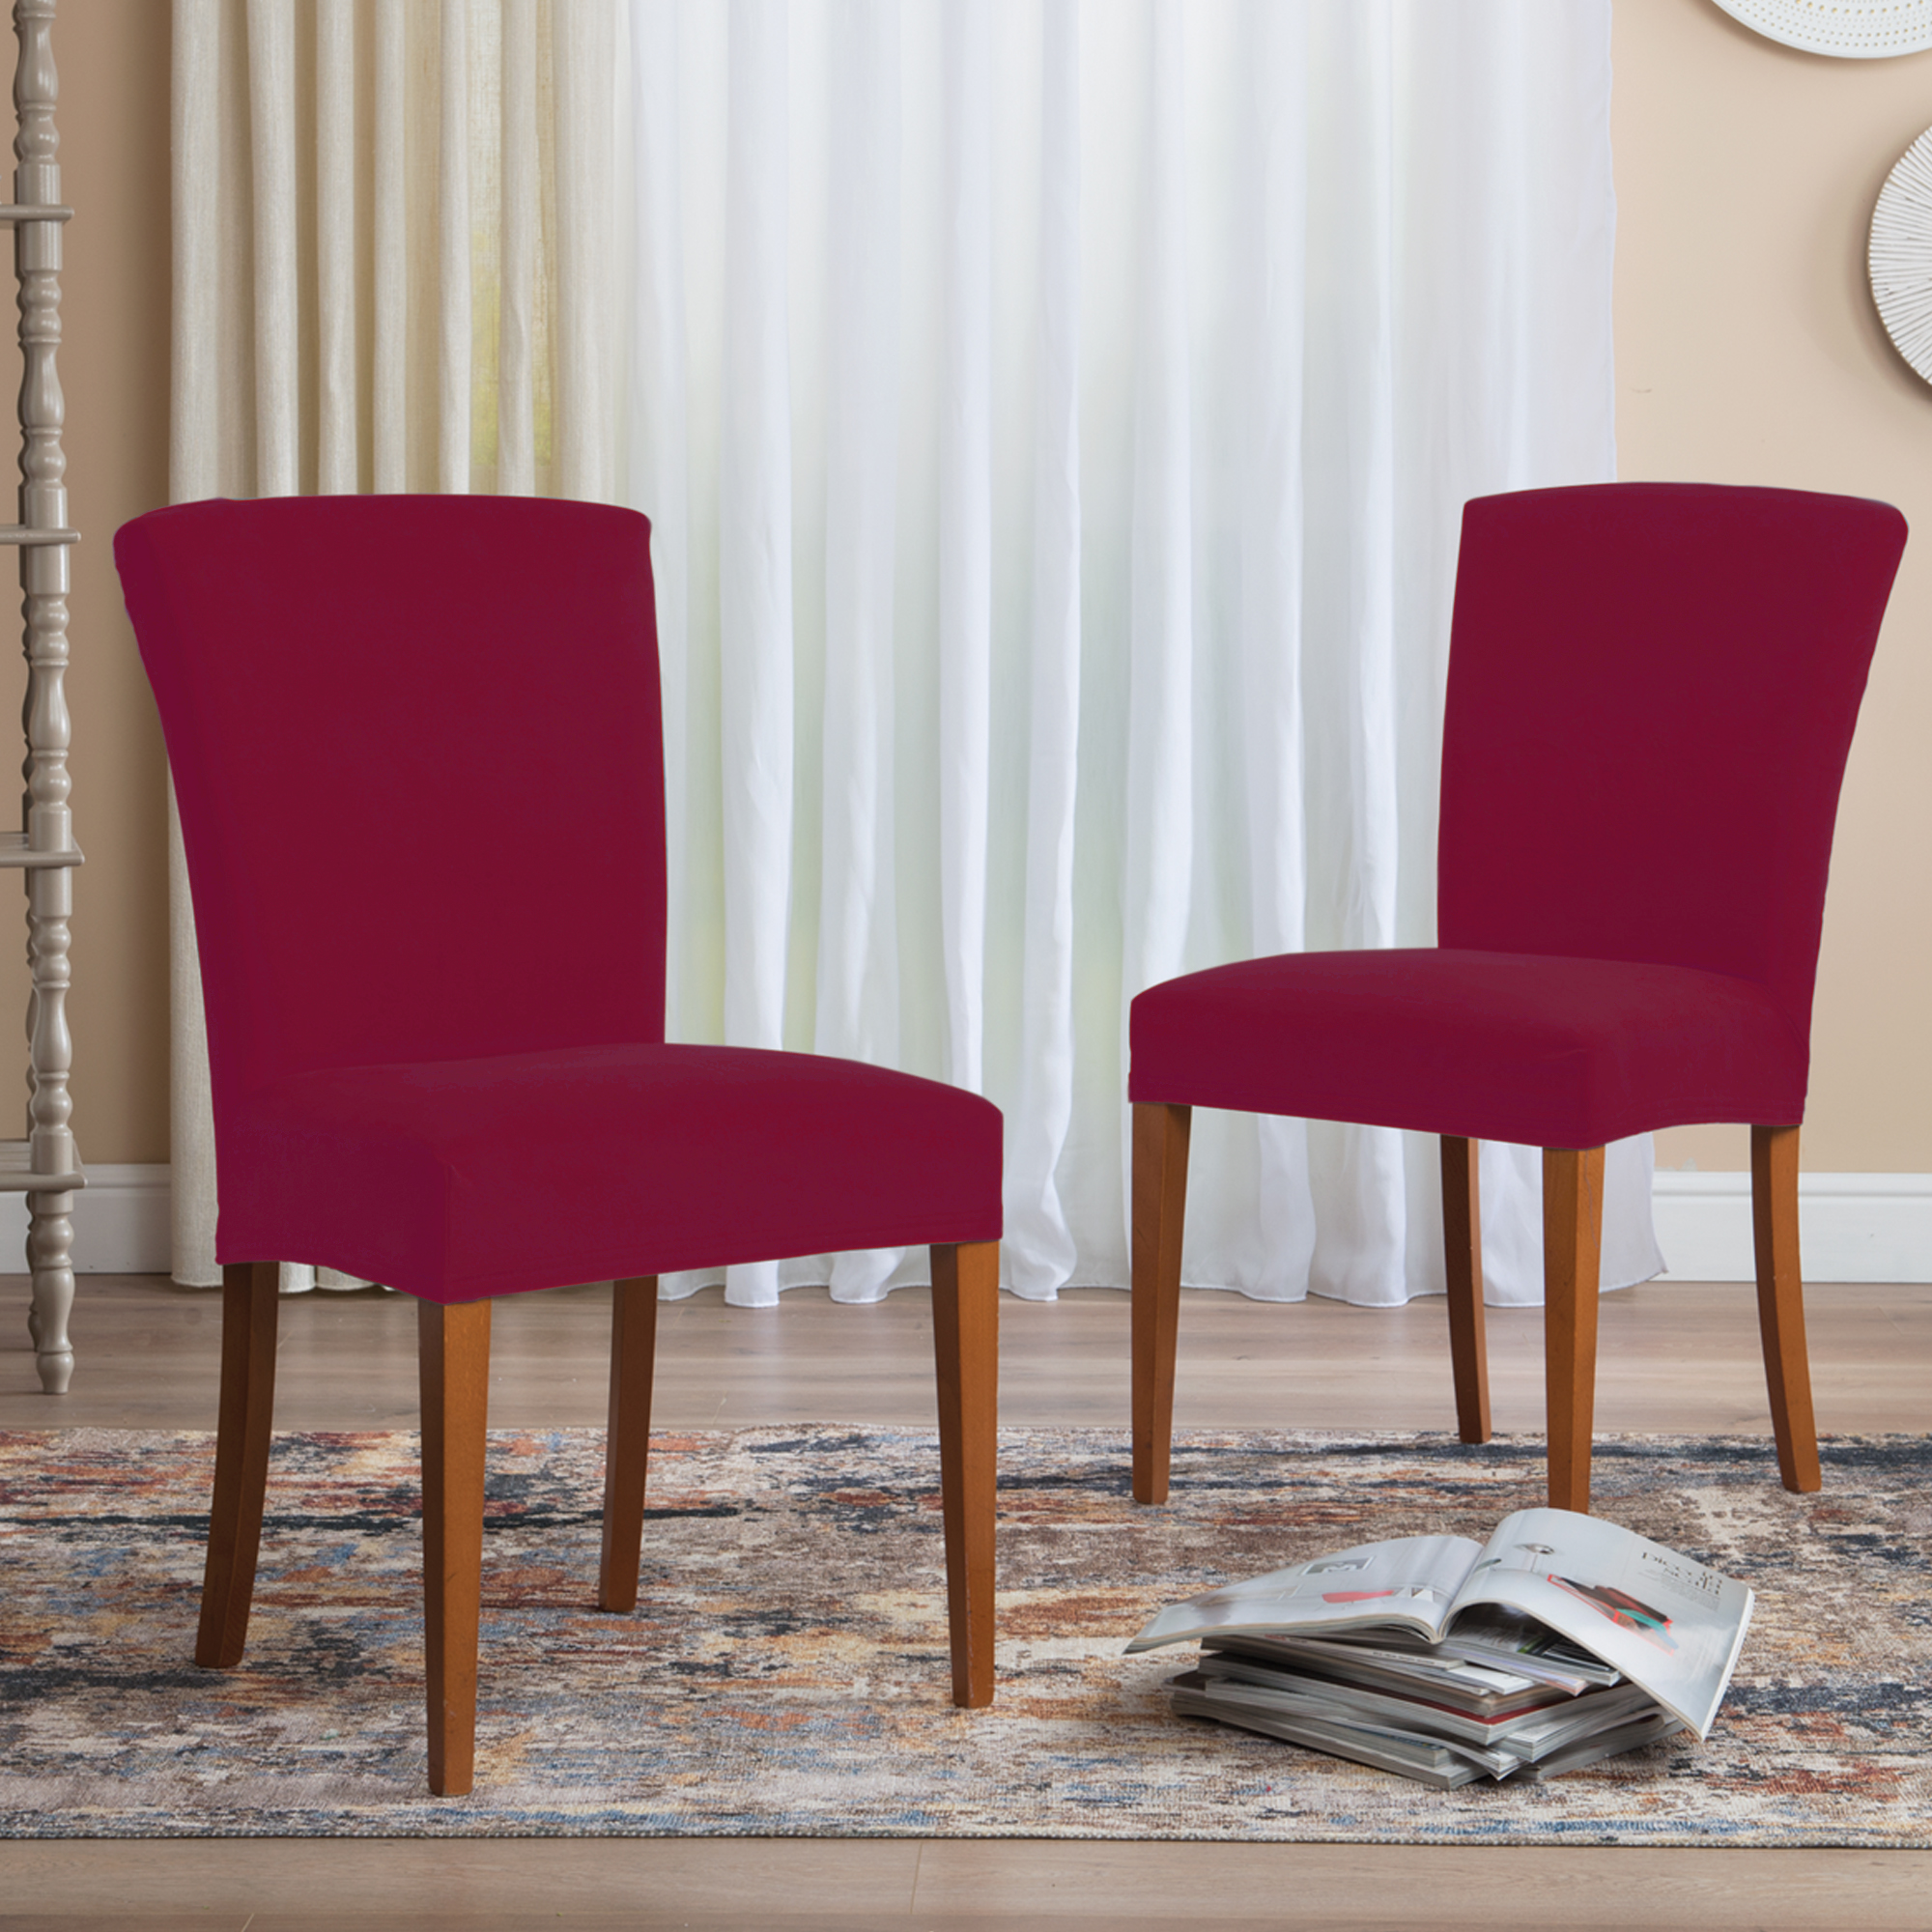 Pair of Chair Covers With Backrest Perfecto Bielastic rosso Scudo